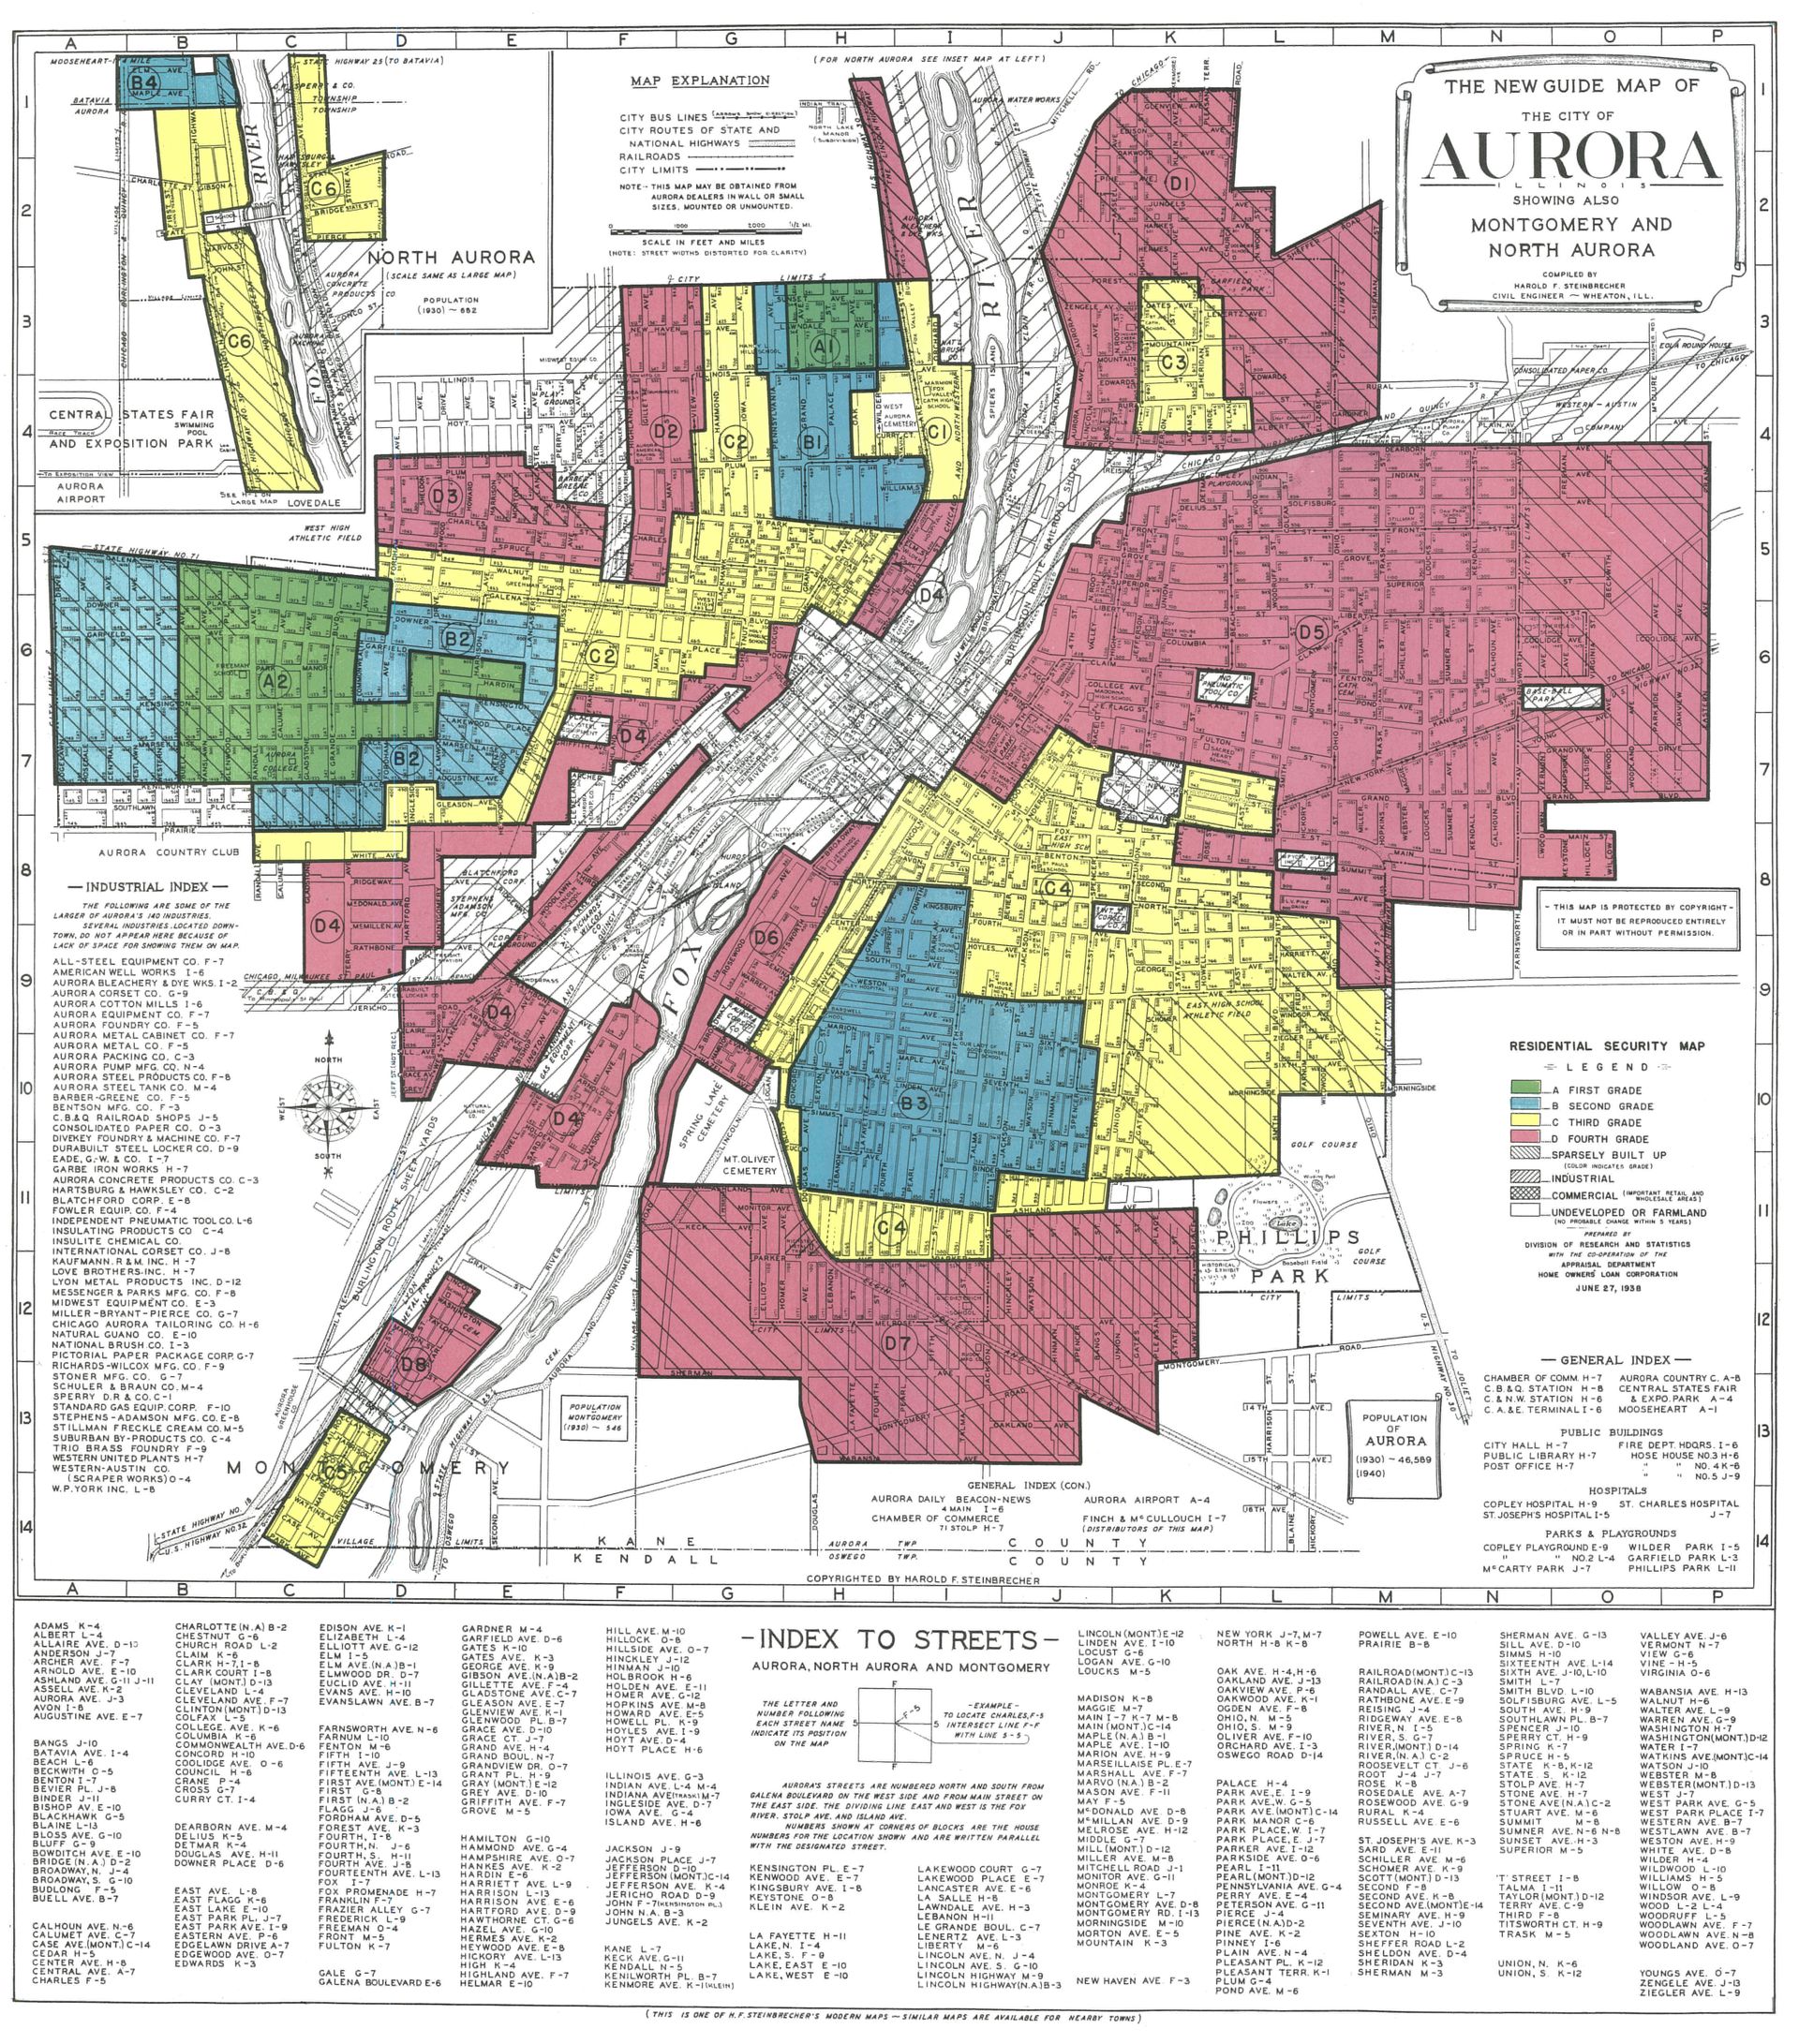 A Home Owners' Loan Corporation (HOLC) map of Aurora, Illinois.